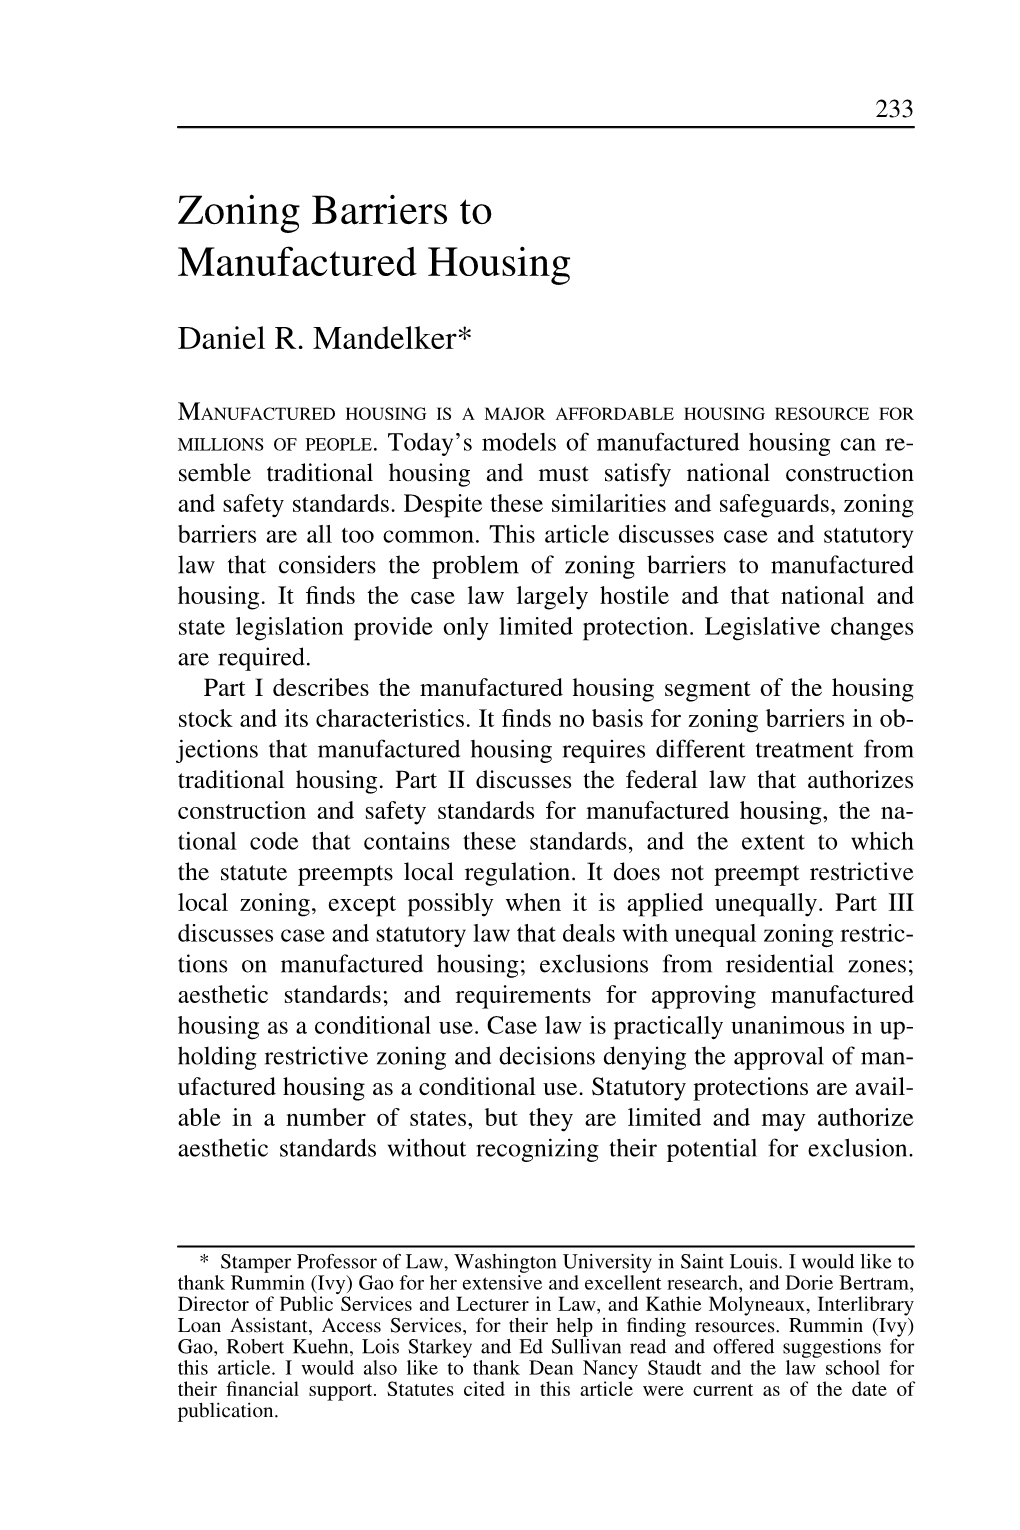 Zoning Barriers to Manufactured Housing